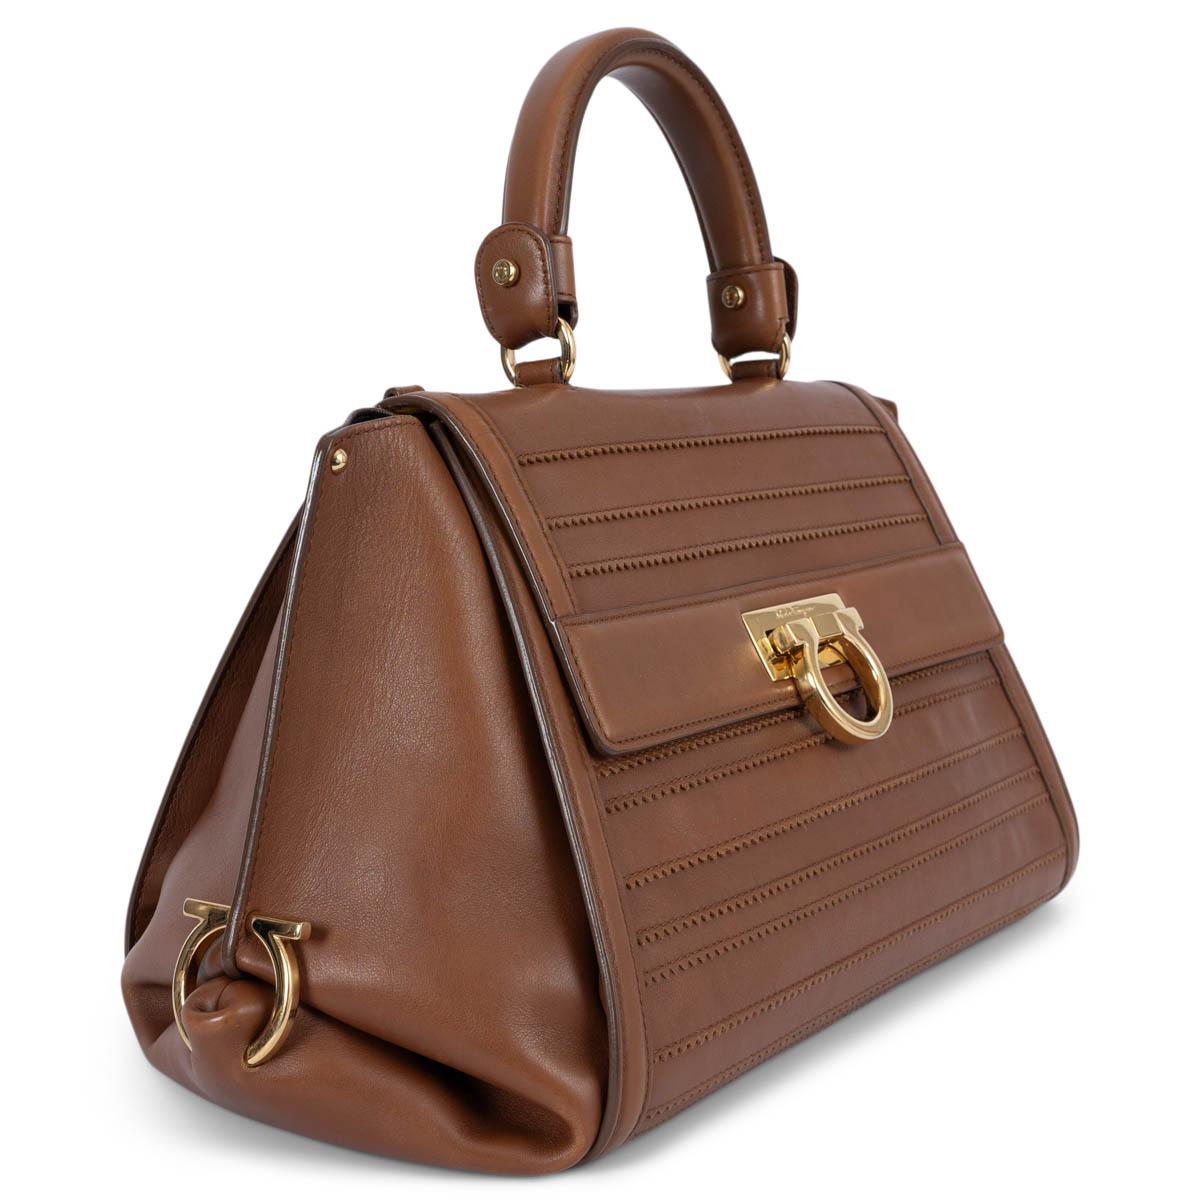 100% authentic Salvatore Ferragamo Sofia shoulder bag in brown leather featuring gold-tone hardware. Opens with logo flap fastener and is lined in lack and yellow calfskin with three open pockets. The design features an adjustable and removable